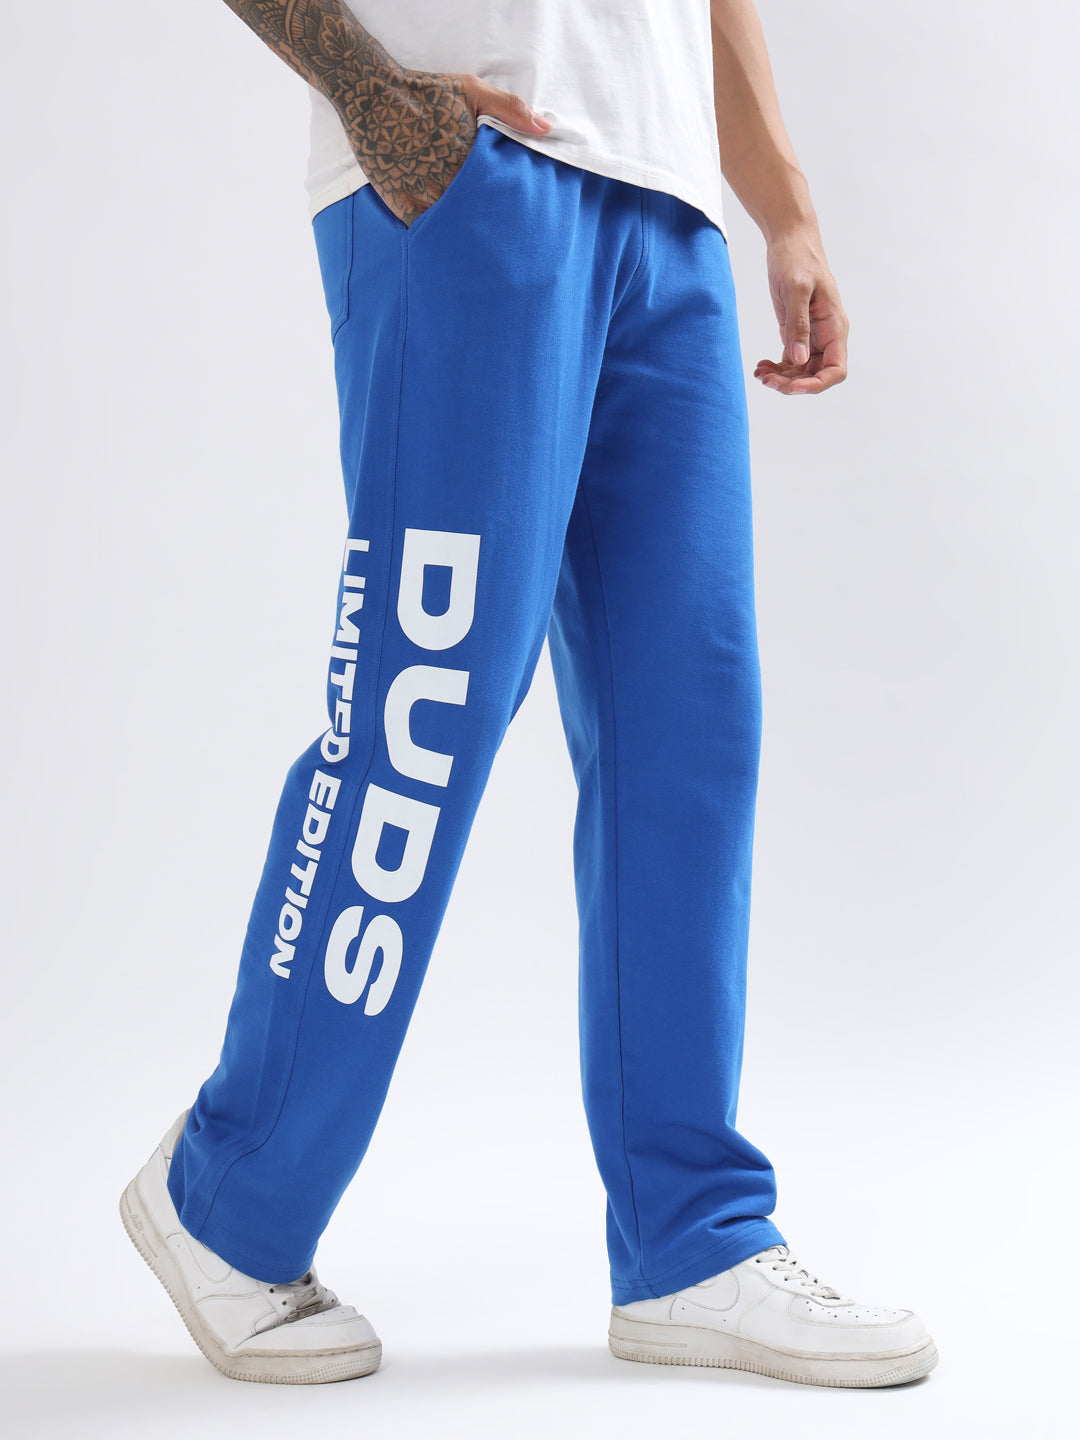 DUDS LIMITED EDITION JOGGER (ROYAL BLUE) - Wearduds